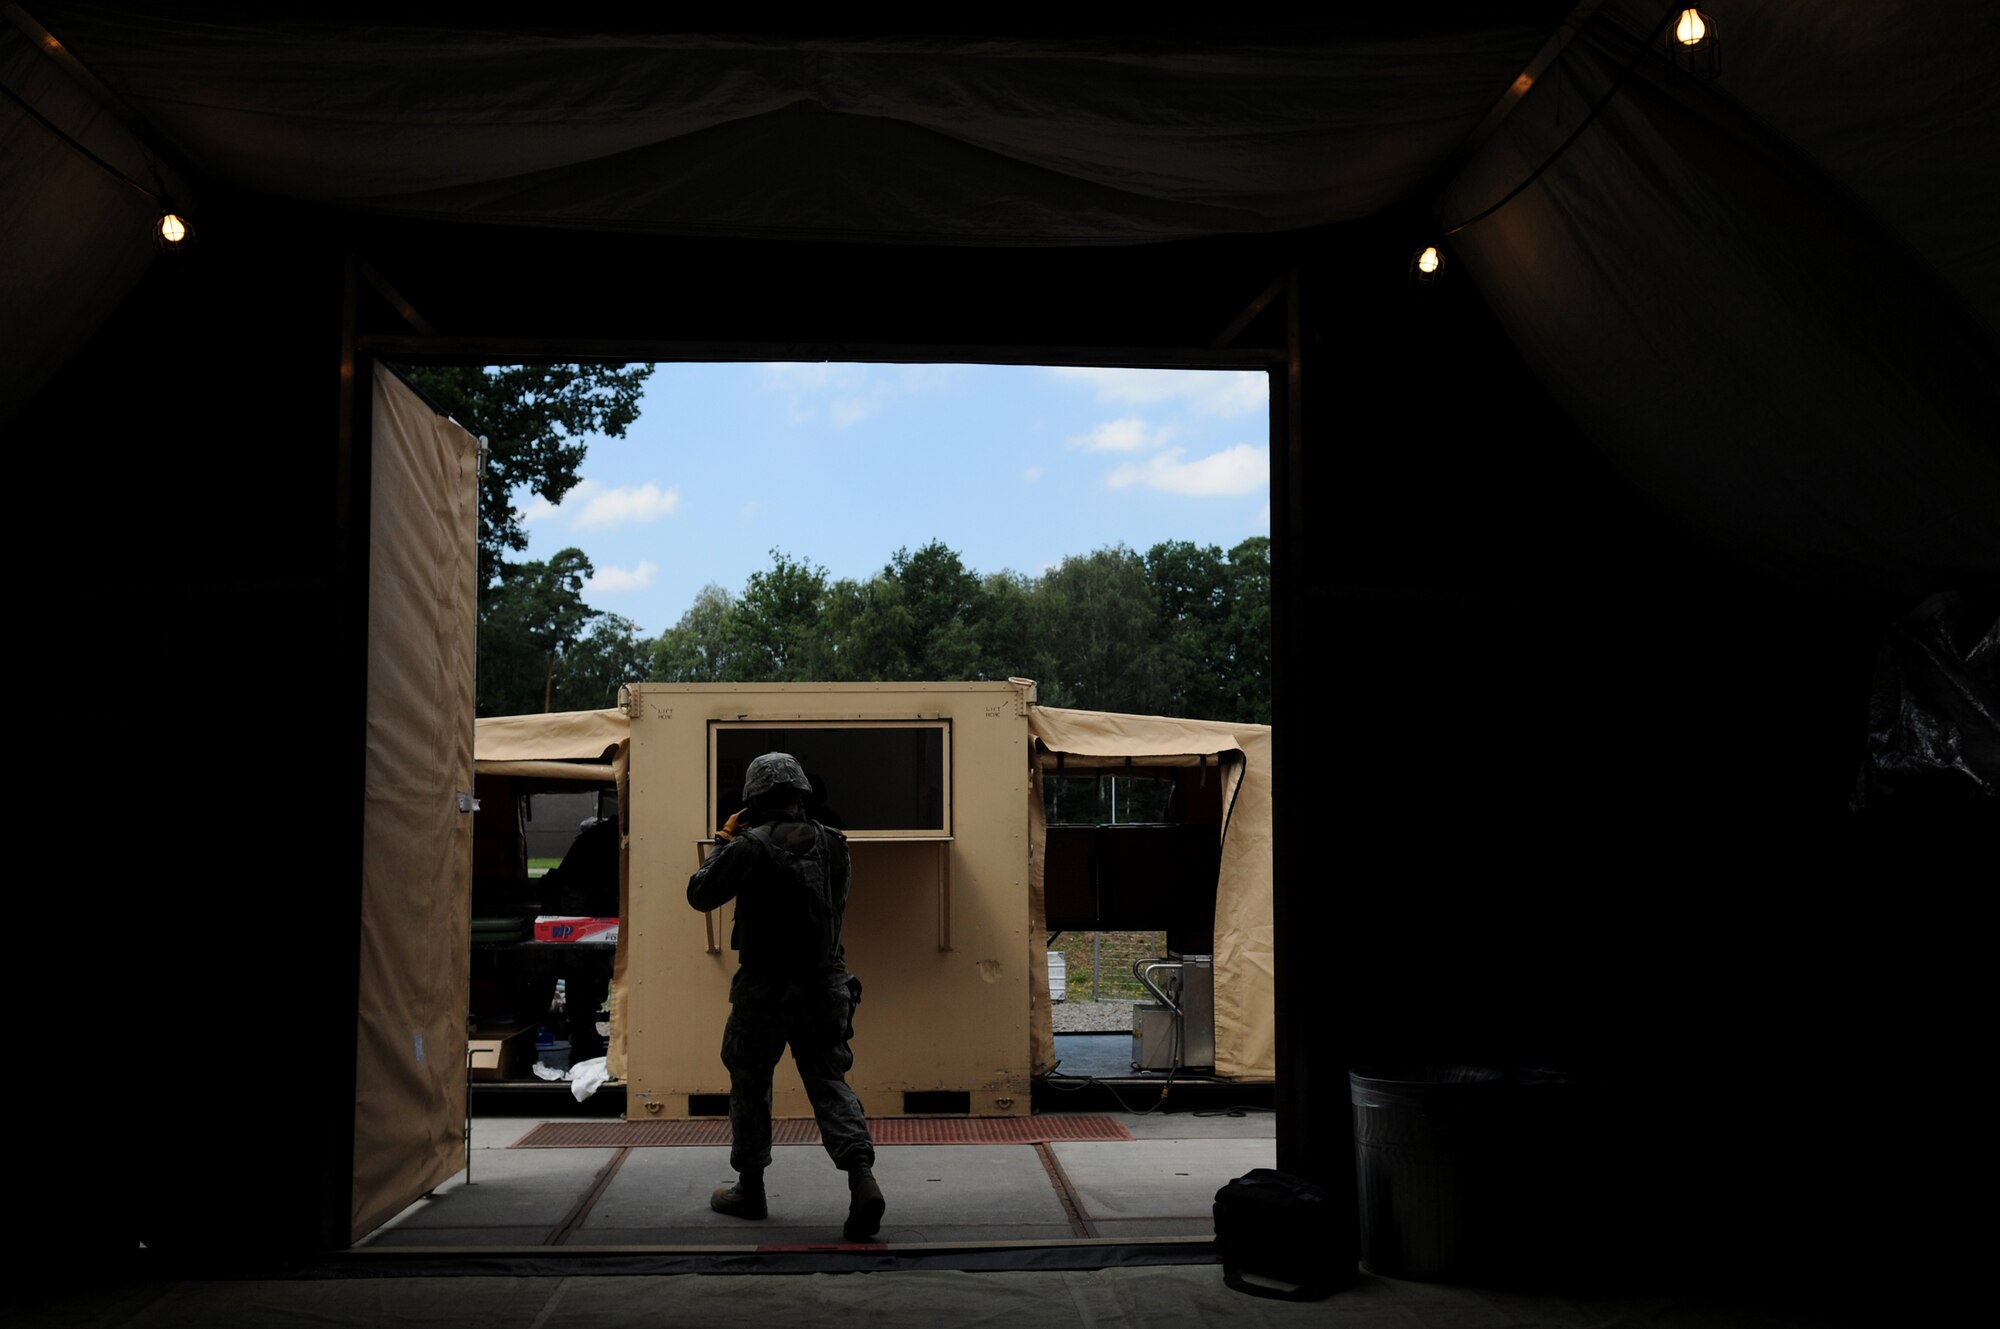 U.S. Air Force 1st Lt. Thomas Lanigan, 86th Airlift Wing Services Squadron operations officer, heads out the tent after eating chow to continue the mission exercise during the Silver Flag exercise on Ramstein Air Base, Germany, Aug. 1, 2009. The Silver Flag exercise gives participants the basic contingency skills to set up a bed down operation anywhere in the world. (U.S. Air Force photo by Airman 1st Class Grovert Fuentes-Contreras)(Released)